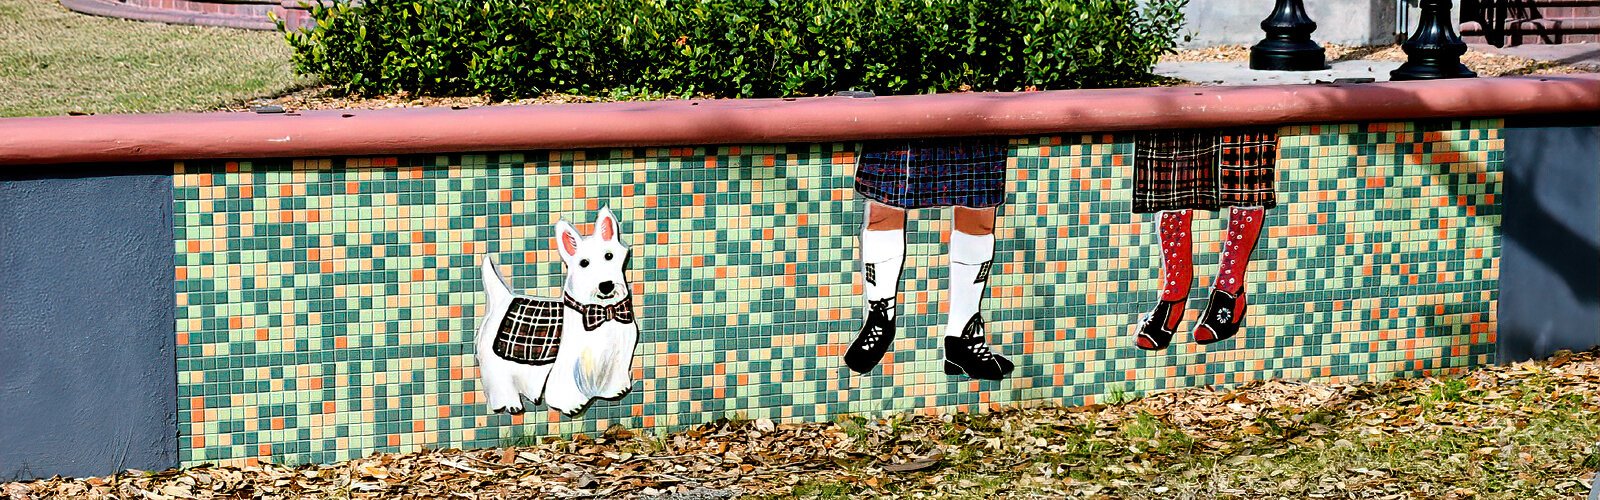 In recognition of Dunedin’s Scottish heritage as well as love of dogs, a mural made of small ceramic tiles showcases Scottish garments together with a Scottish terrier.